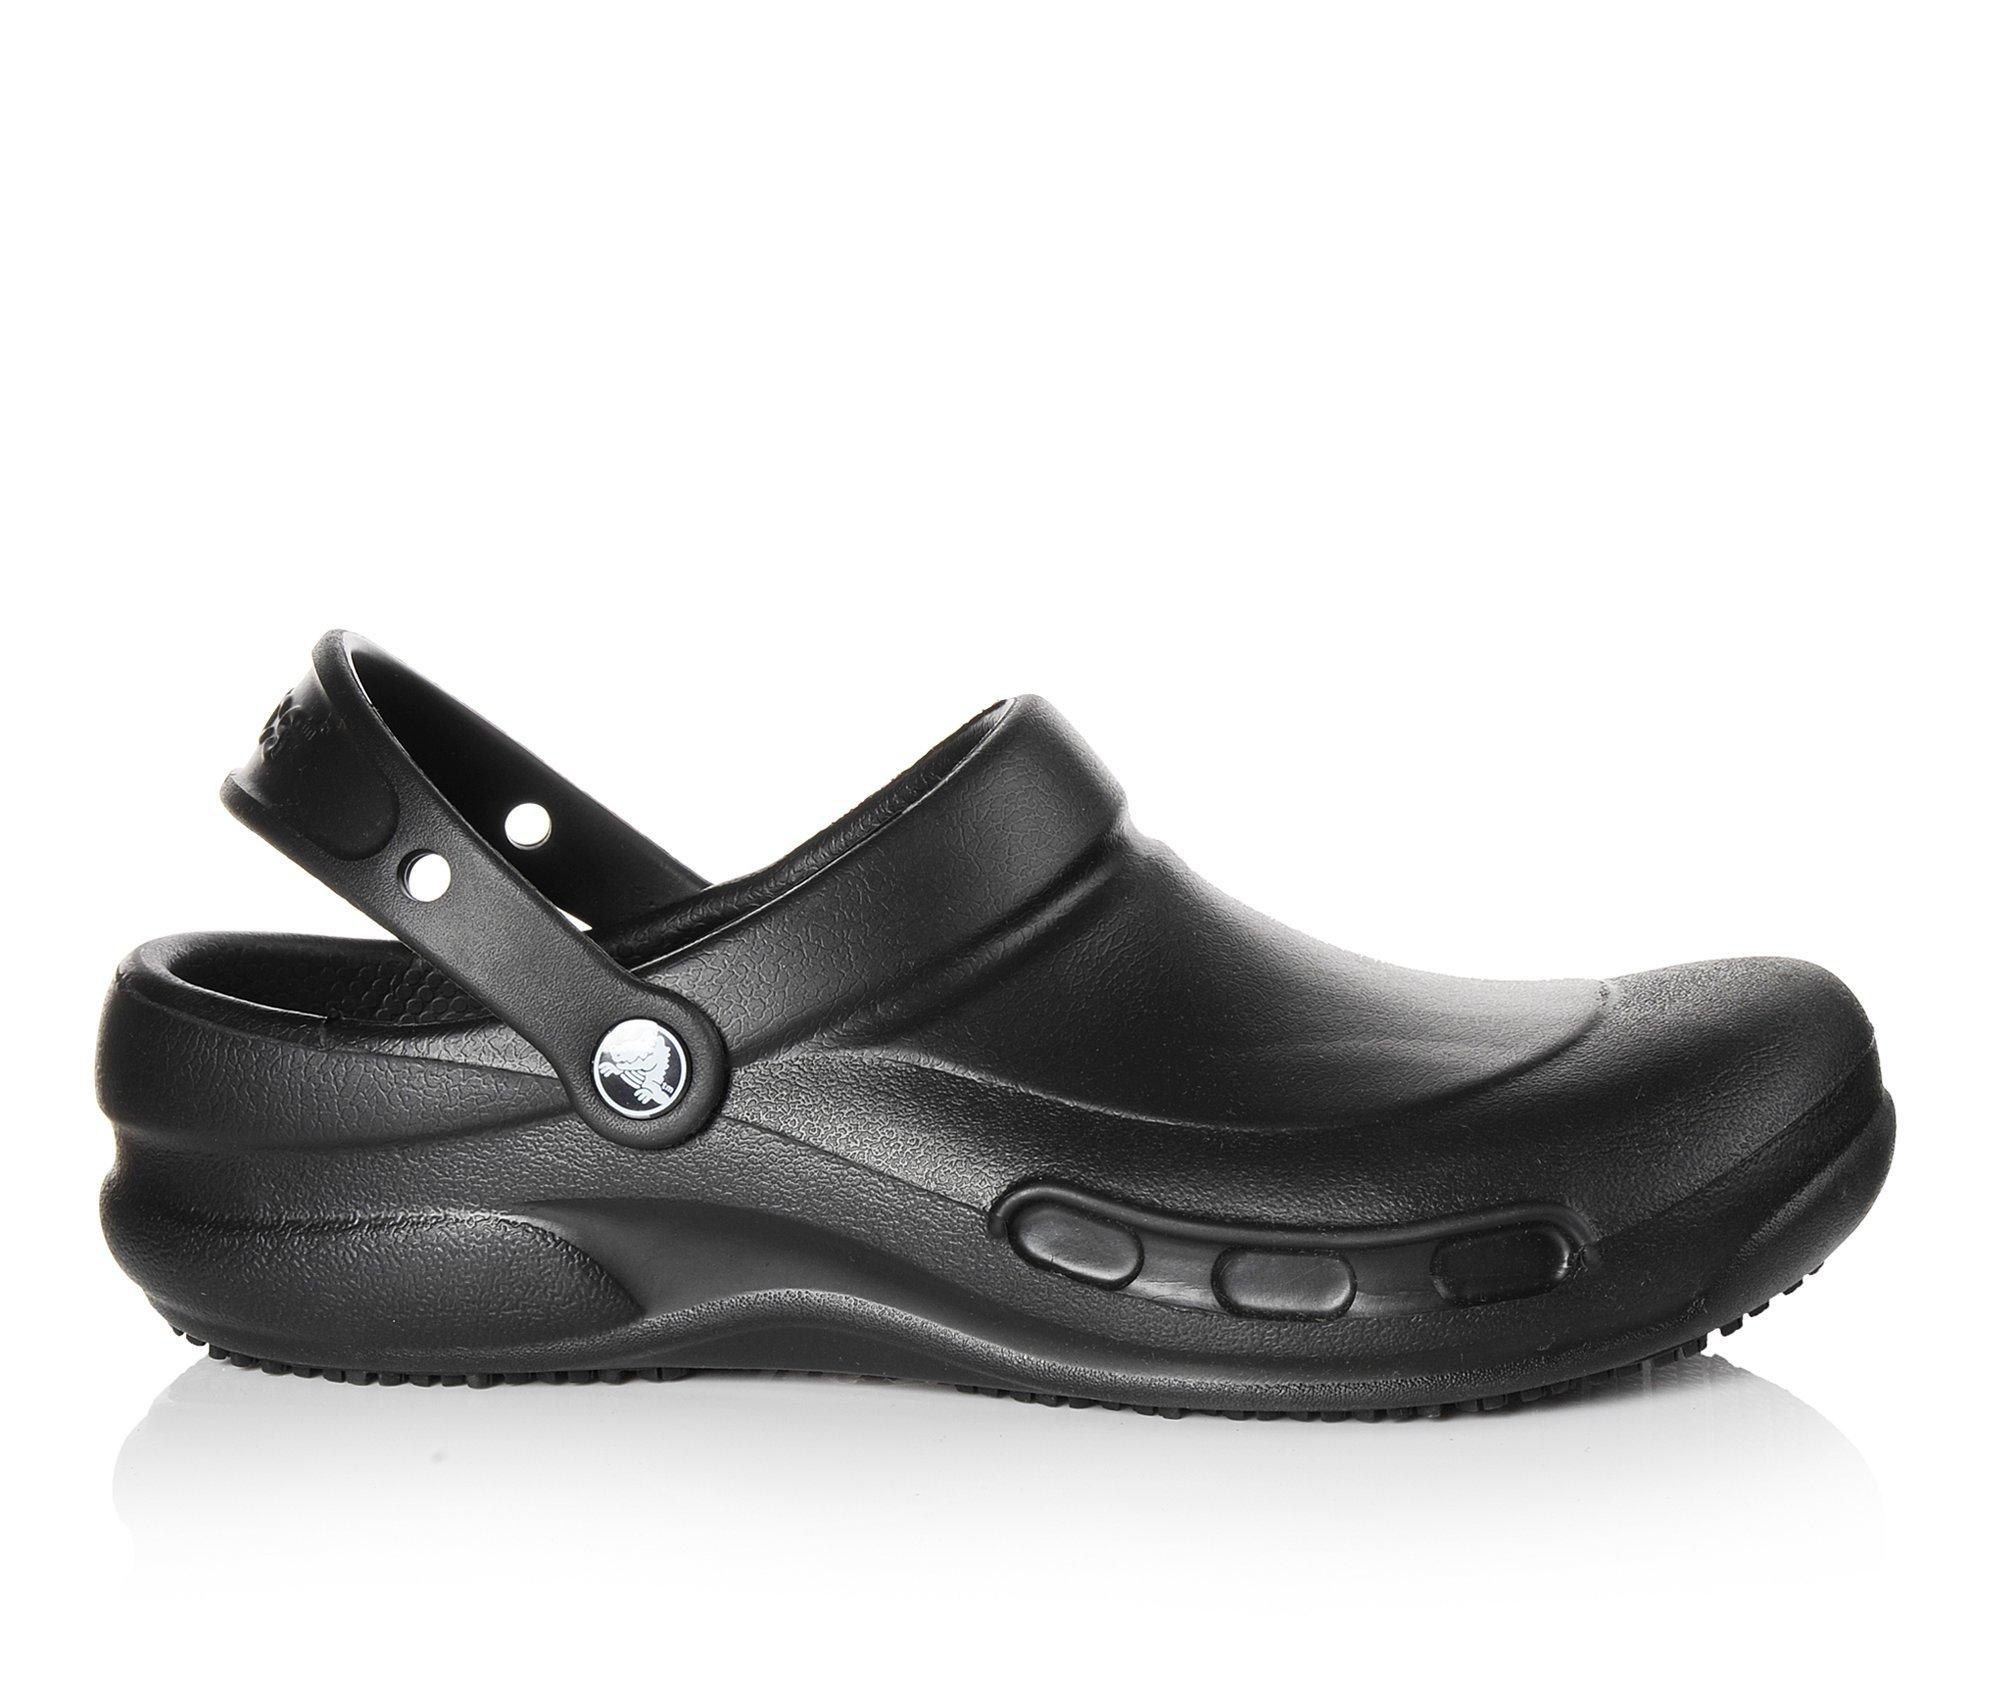 Crocs Work Shoes at Shoe Carnival | Non-Slip Work Shoes